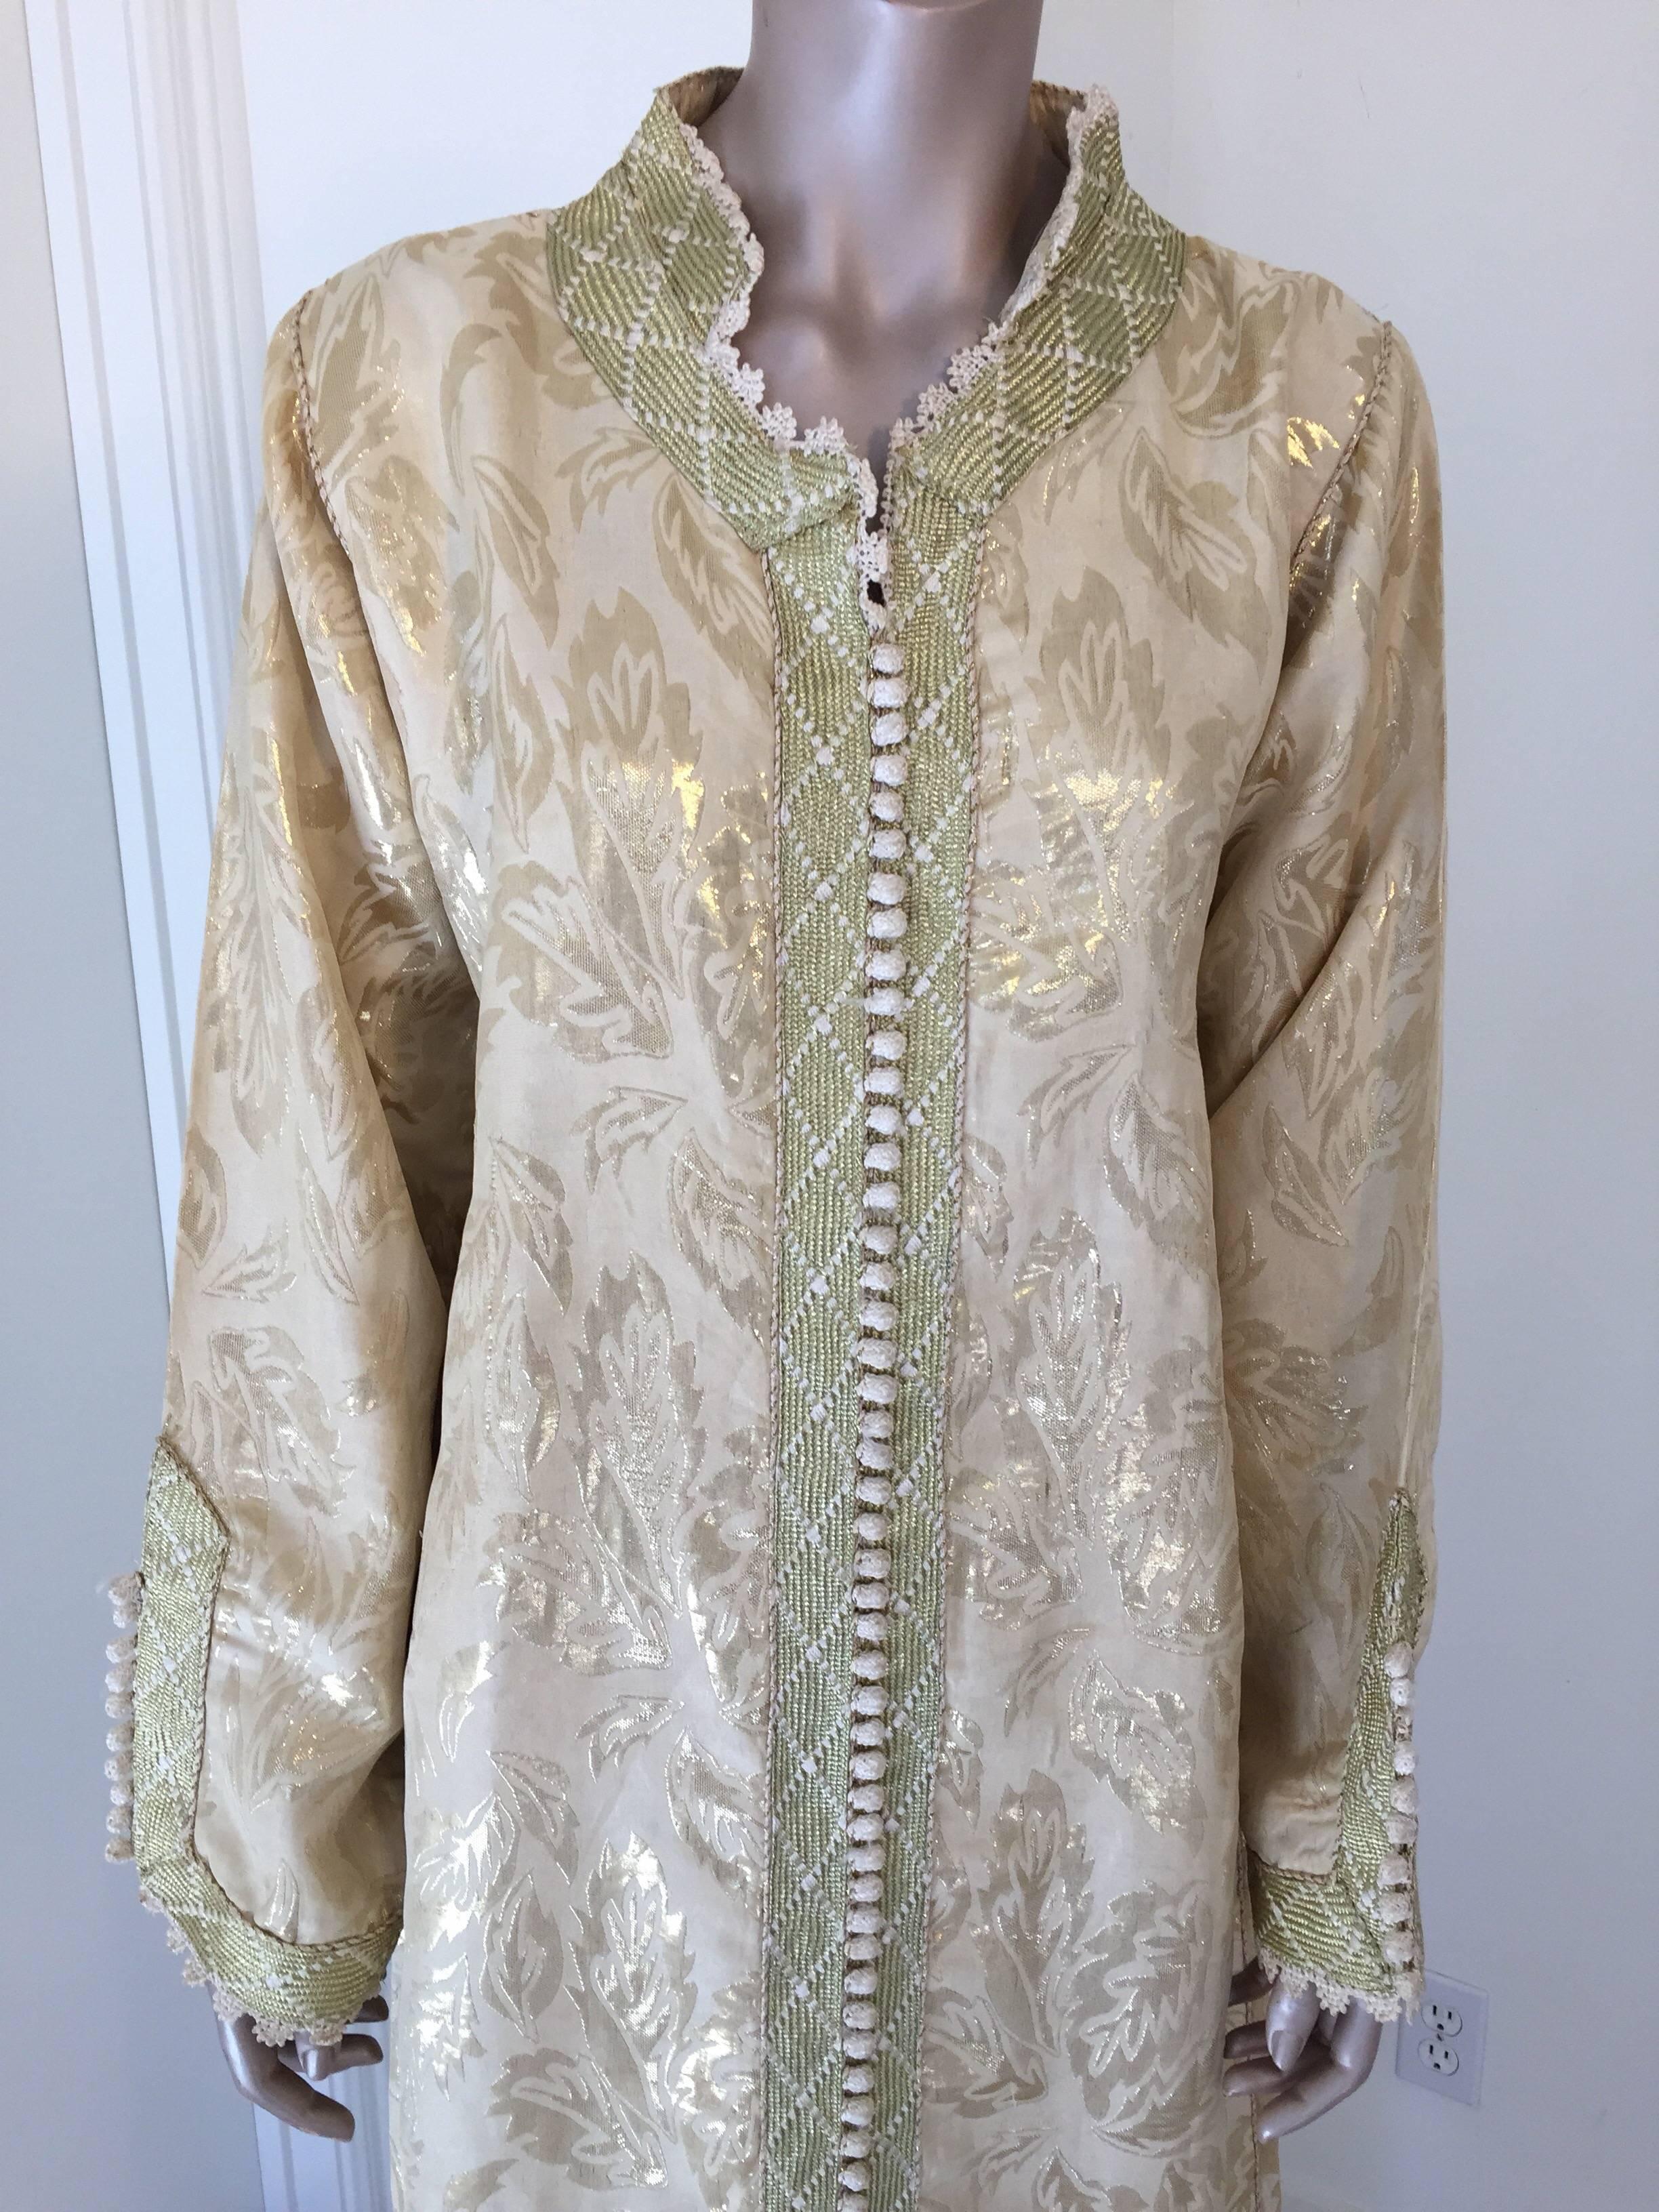 Hand-Crafted Moroccan Metallic Gold Brocade Kaftan, Maxi Dress Kaftan from Morocco, Africa For Sale